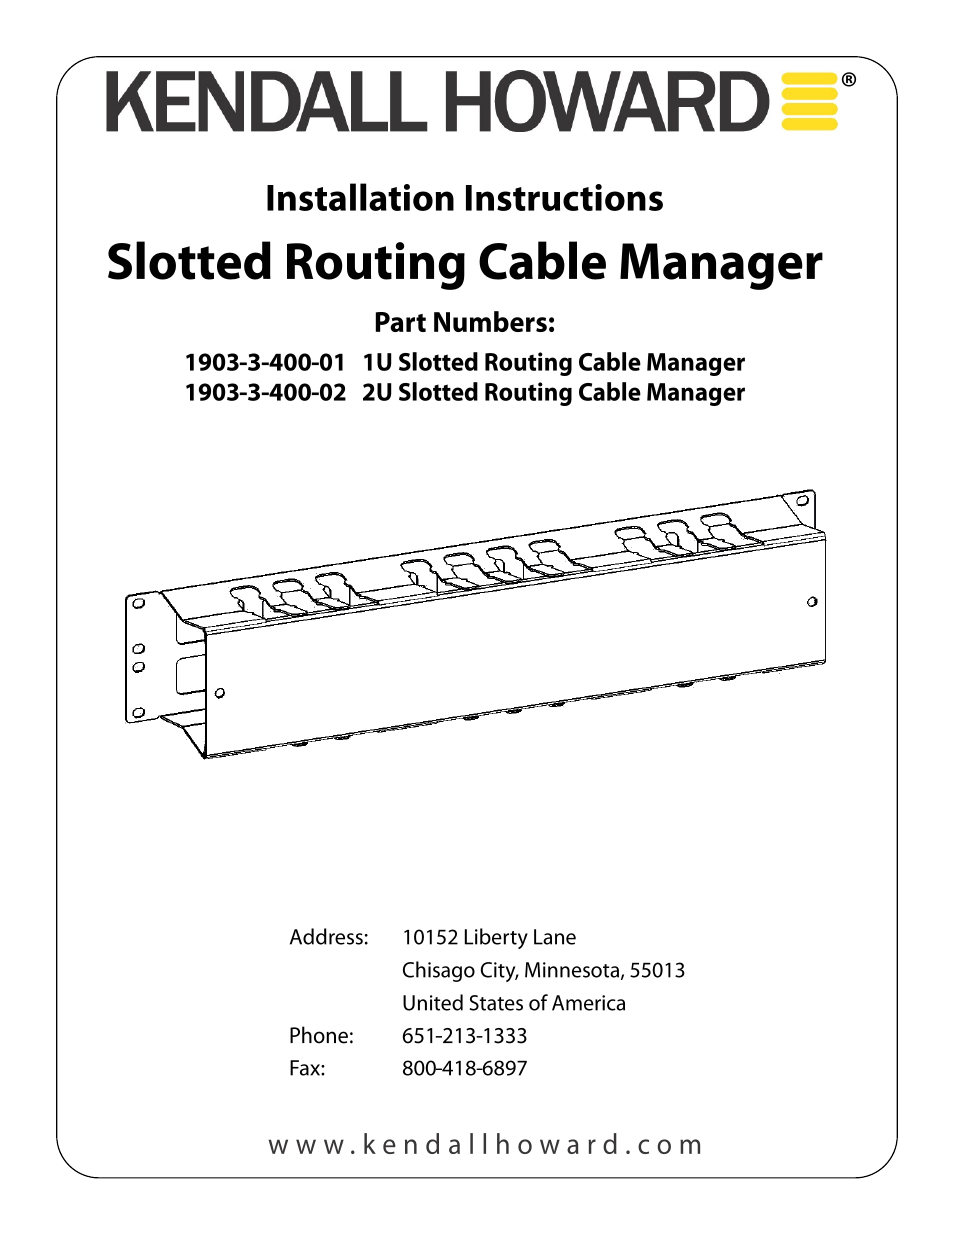 1903-3-400-0x Slotted Routing Cable Manager